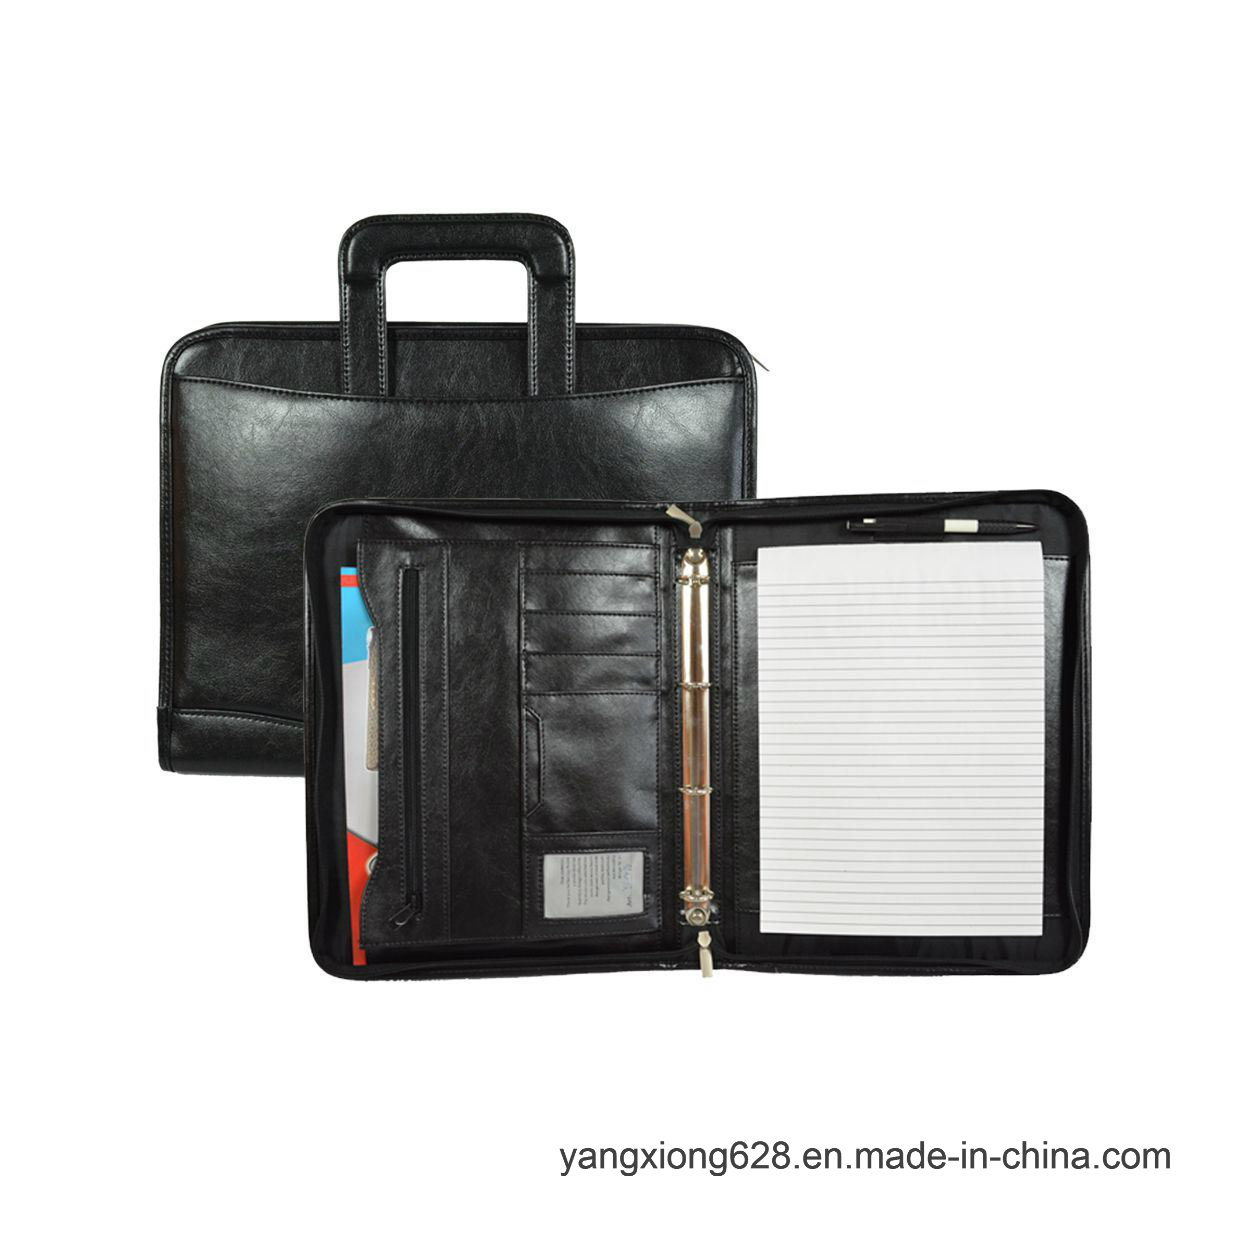 /proimages/2f0j00BQlYLcPWHsqo/office-product-pu-leather-handle-conference-folder-with-calculator.jpg